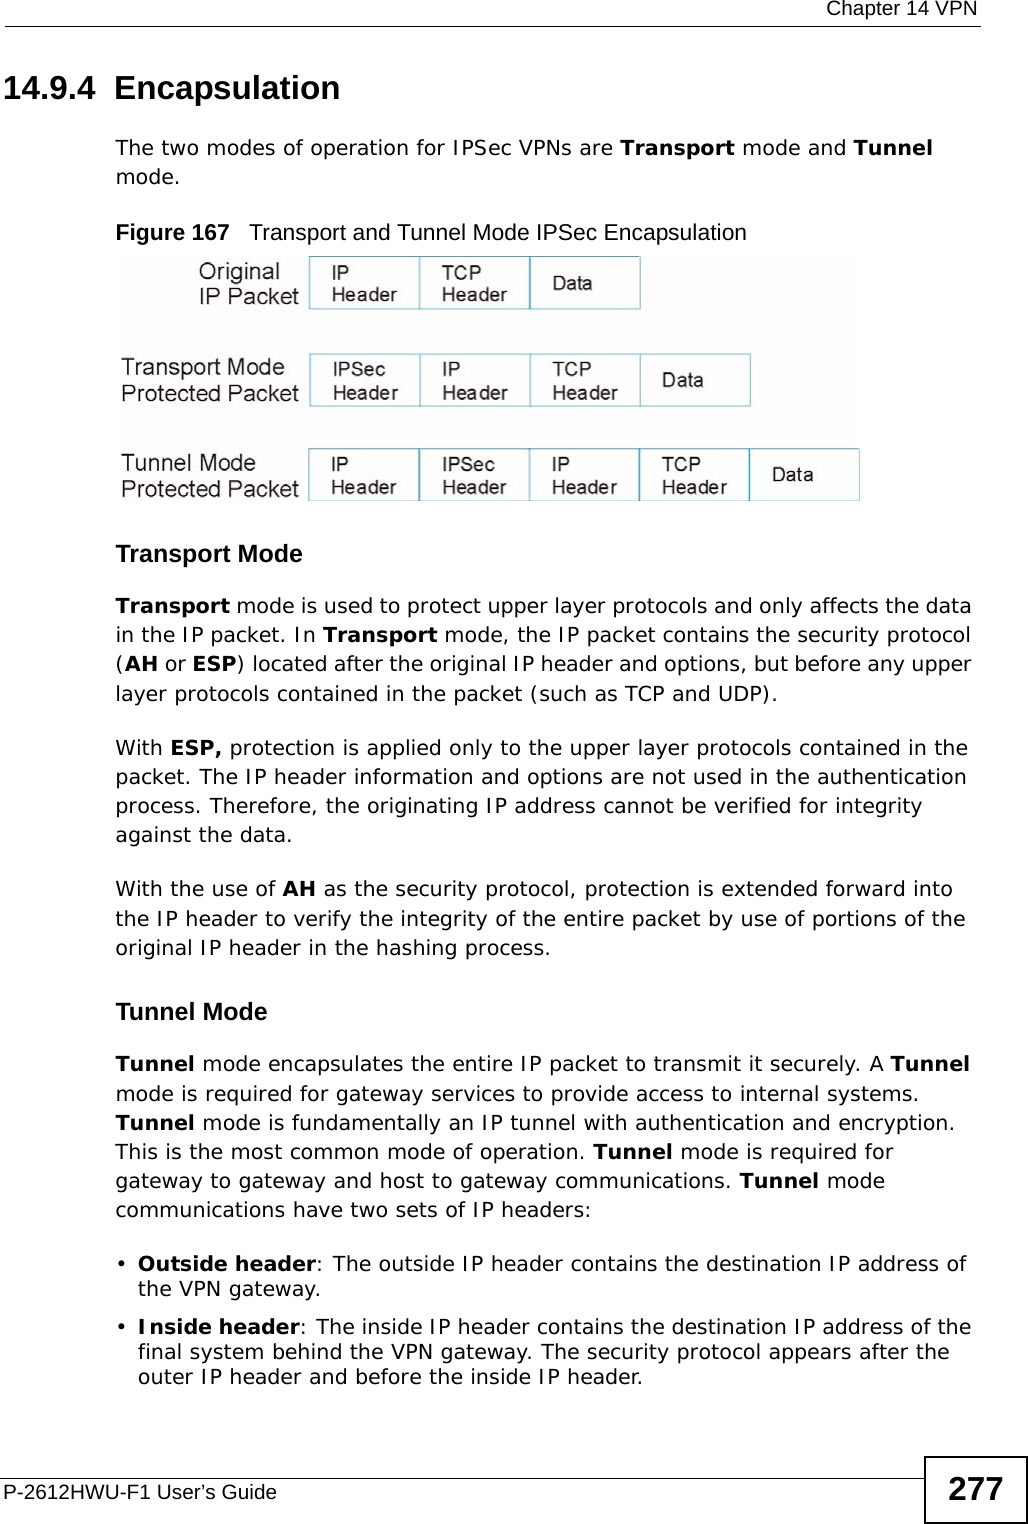  Chapter 14 VPNP-2612HWU-F1 User’s Guide 27714.9.4  EncapsulationThe two modes of operation for IPSec VPNs are Transport mode and Tunnel mode. Figure 167   Transport and Tunnel Mode IPSec EncapsulationTransport ModeTransport mode is used to protect upper layer protocols and only affects the data in the IP packet. In Transport mode, the IP packet contains the security protocol (AH or ESP) located after the original IP header and options, but before any upper layer protocols contained in the packet (such as TCP and UDP). With ESP, protection is applied only to the upper layer protocols contained in the packet. The IP header information and options are not used in the authentication process. Therefore, the originating IP address cannot be verified for integrity against the data. With the use of AH as the security protocol, protection is extended forward into the IP header to verify the integrity of the entire packet by use of portions of the original IP header in the hashing process.Tunnel Mode Tunnel mode encapsulates the entire IP packet to transmit it securely. A Tunnel mode is required for gateway services to provide access to internal systems. Tunnel mode is fundamentally an IP tunnel with authentication and encryption. This is the most common mode of operation. Tunnel mode is required for gateway to gateway and host to gateway communications. Tunnel mode communications have two sets of IP headers:•Outside header: The outside IP header contains the destination IP address of the VPN gateway.•Inside header: The inside IP header contains the destination IP address of the final system behind the VPN gateway. The security protocol appears after the outer IP header and before the inside IP header. 